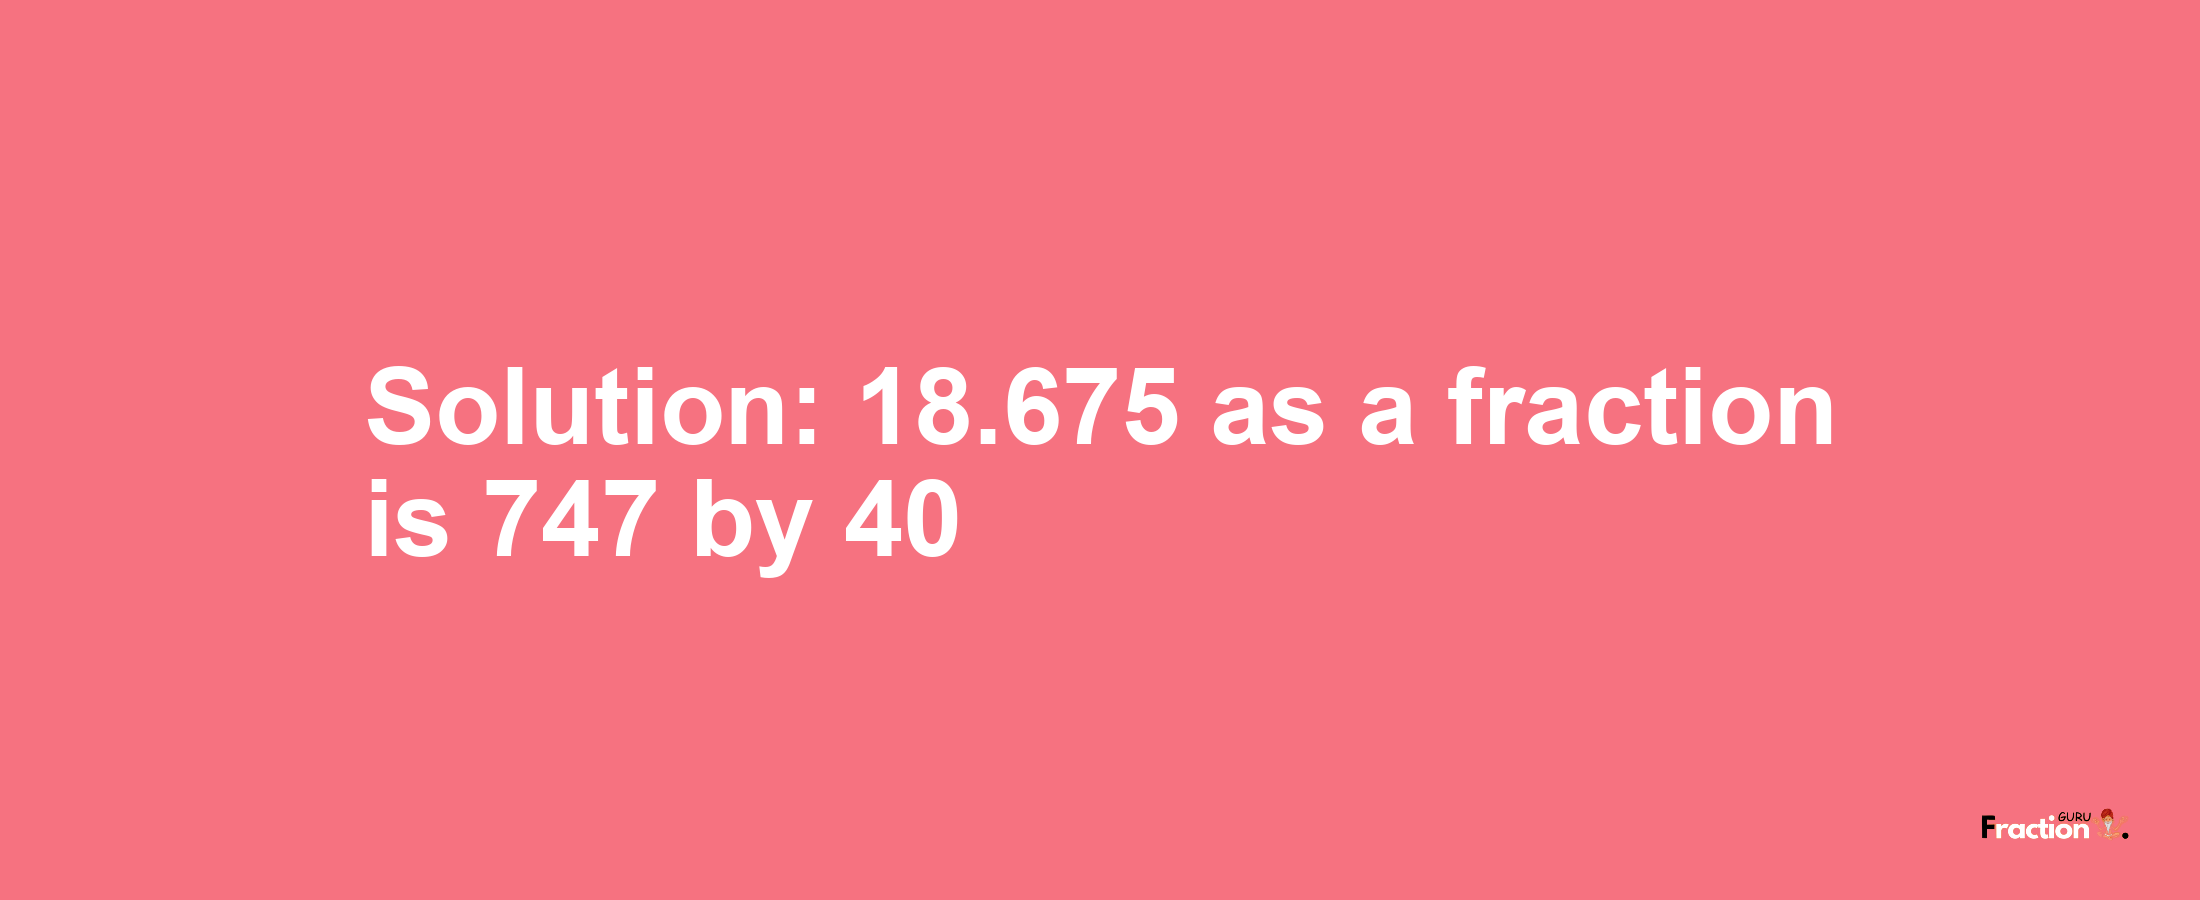 Solution:18.675 as a fraction is 747/40